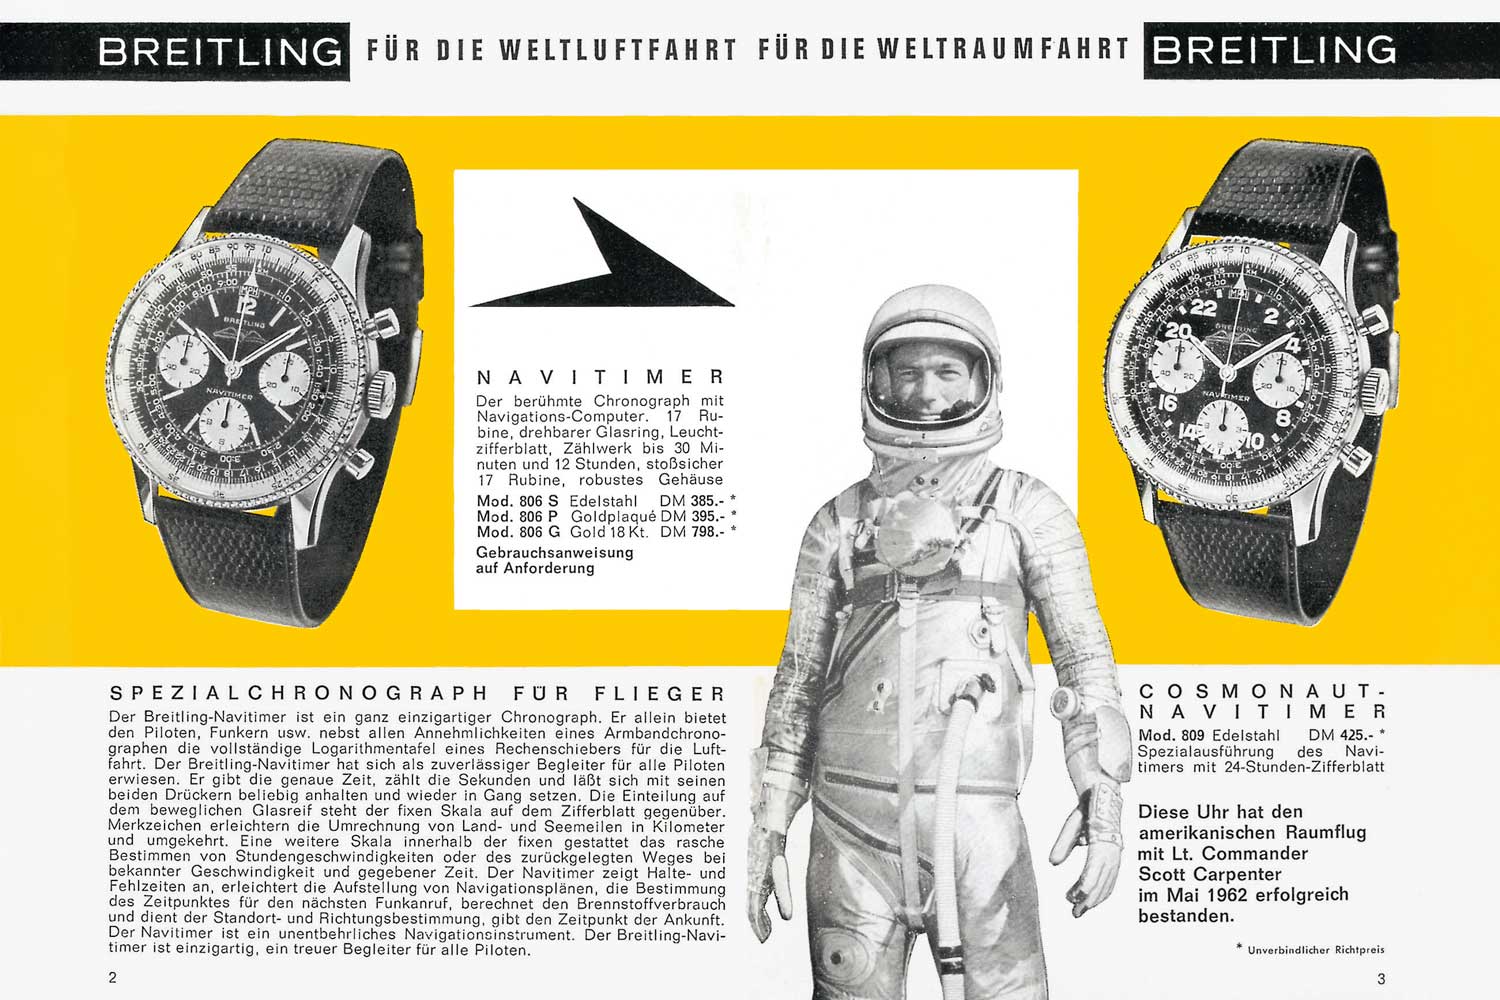 Breitling advertisement from the 1964 Breitling Catalogue for the Navitimer and the Navitimer Cosmonaute